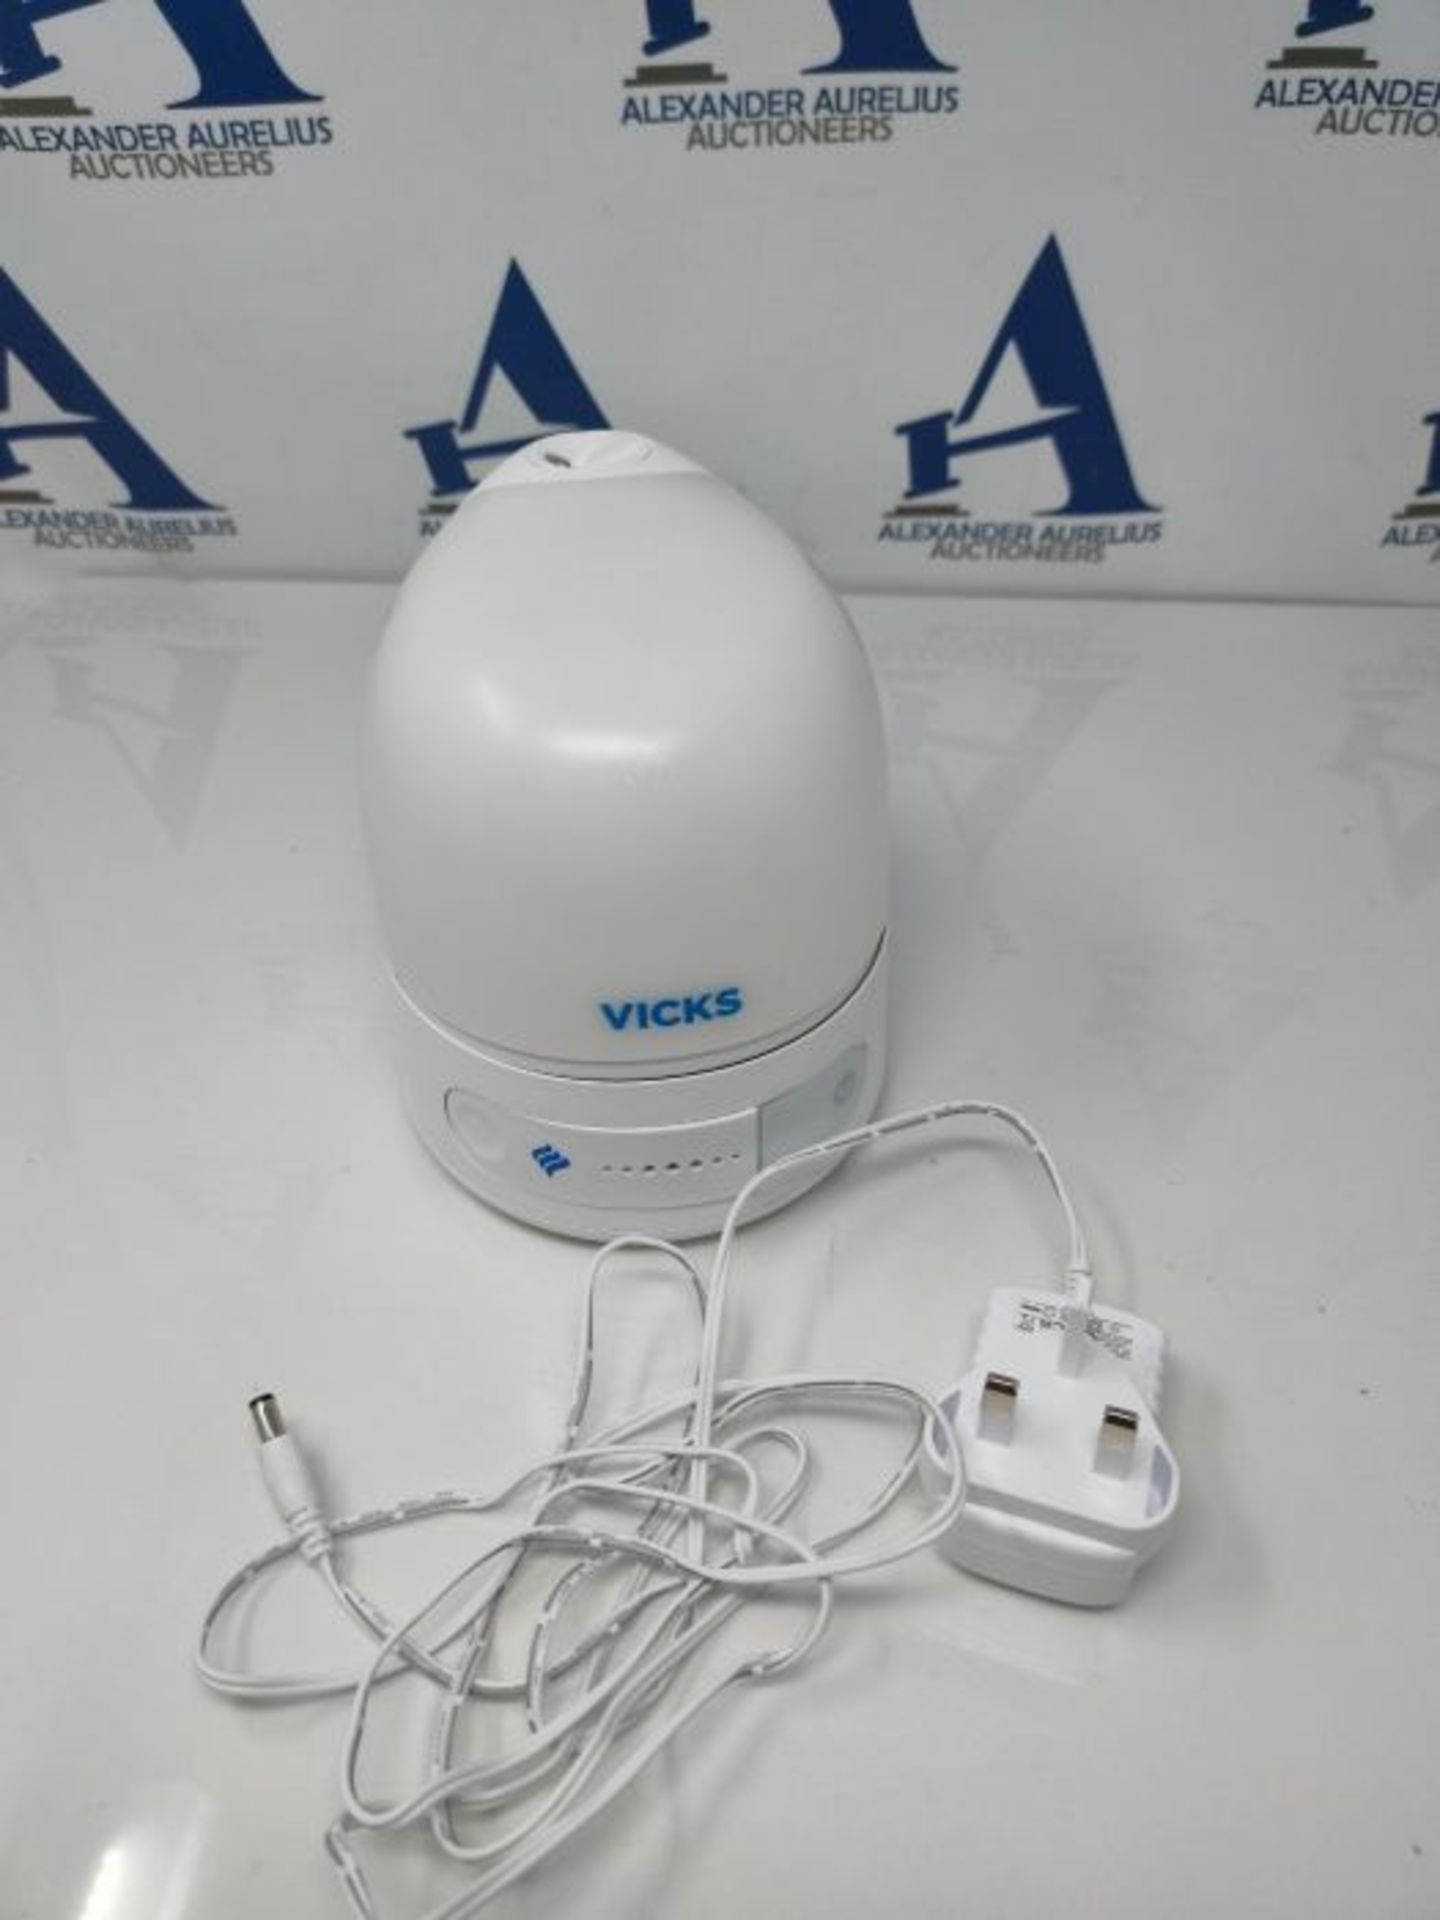 Vicks Personal Cool Mist Ultrasonic Humidifier - Small, Easy to Use, Quiet - Constant - Image 3 of 3